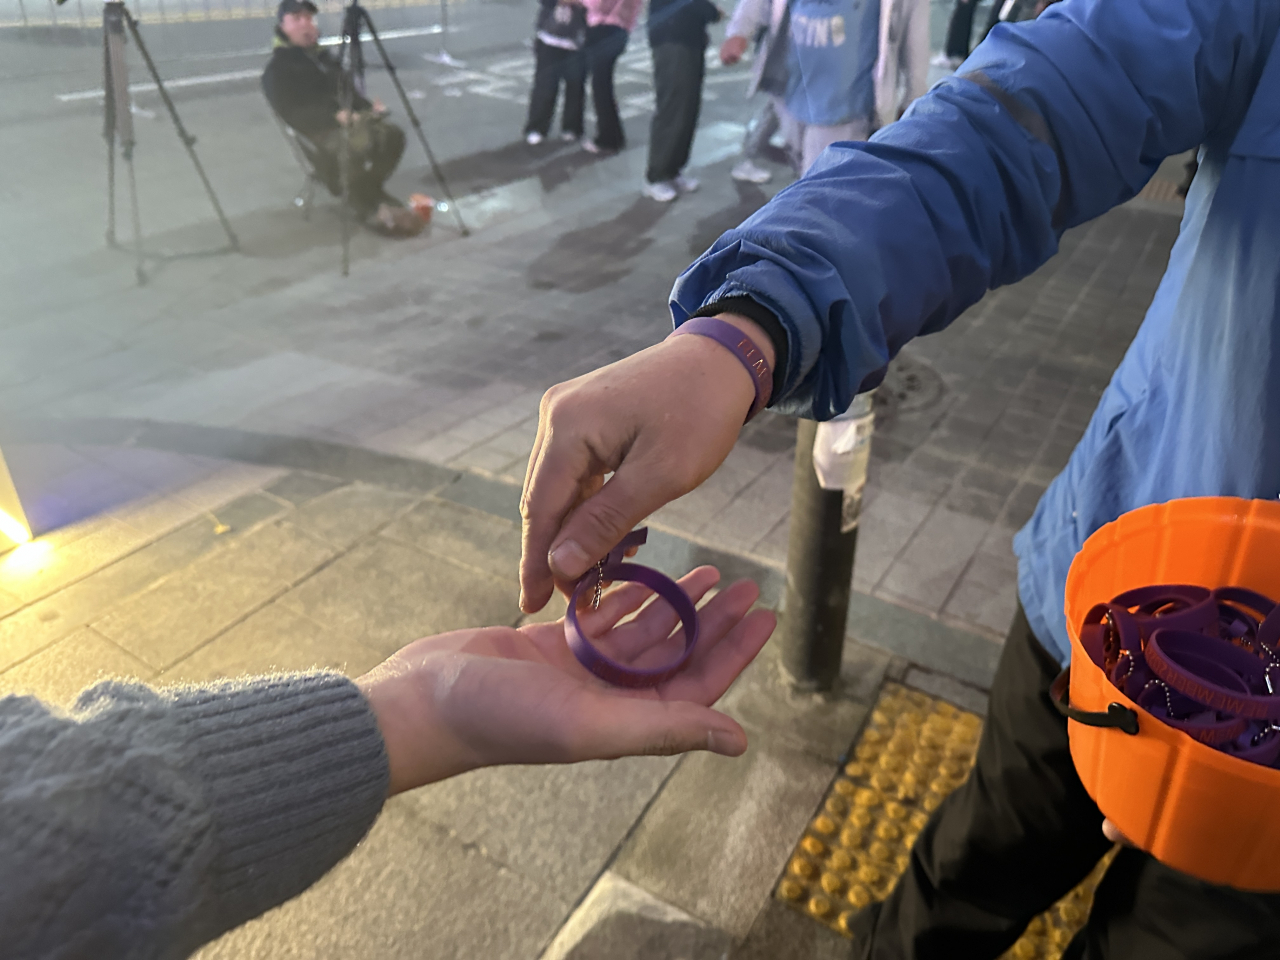 A volunteer from the Itaewon Disaster Citizens’ Task Force and Itaewon Disaster Bereaved Families hand out purple ribbons and bracelets to a passerby at Itaewon on Oct. 28. (Lee Jung-joo/The Korea Herald)